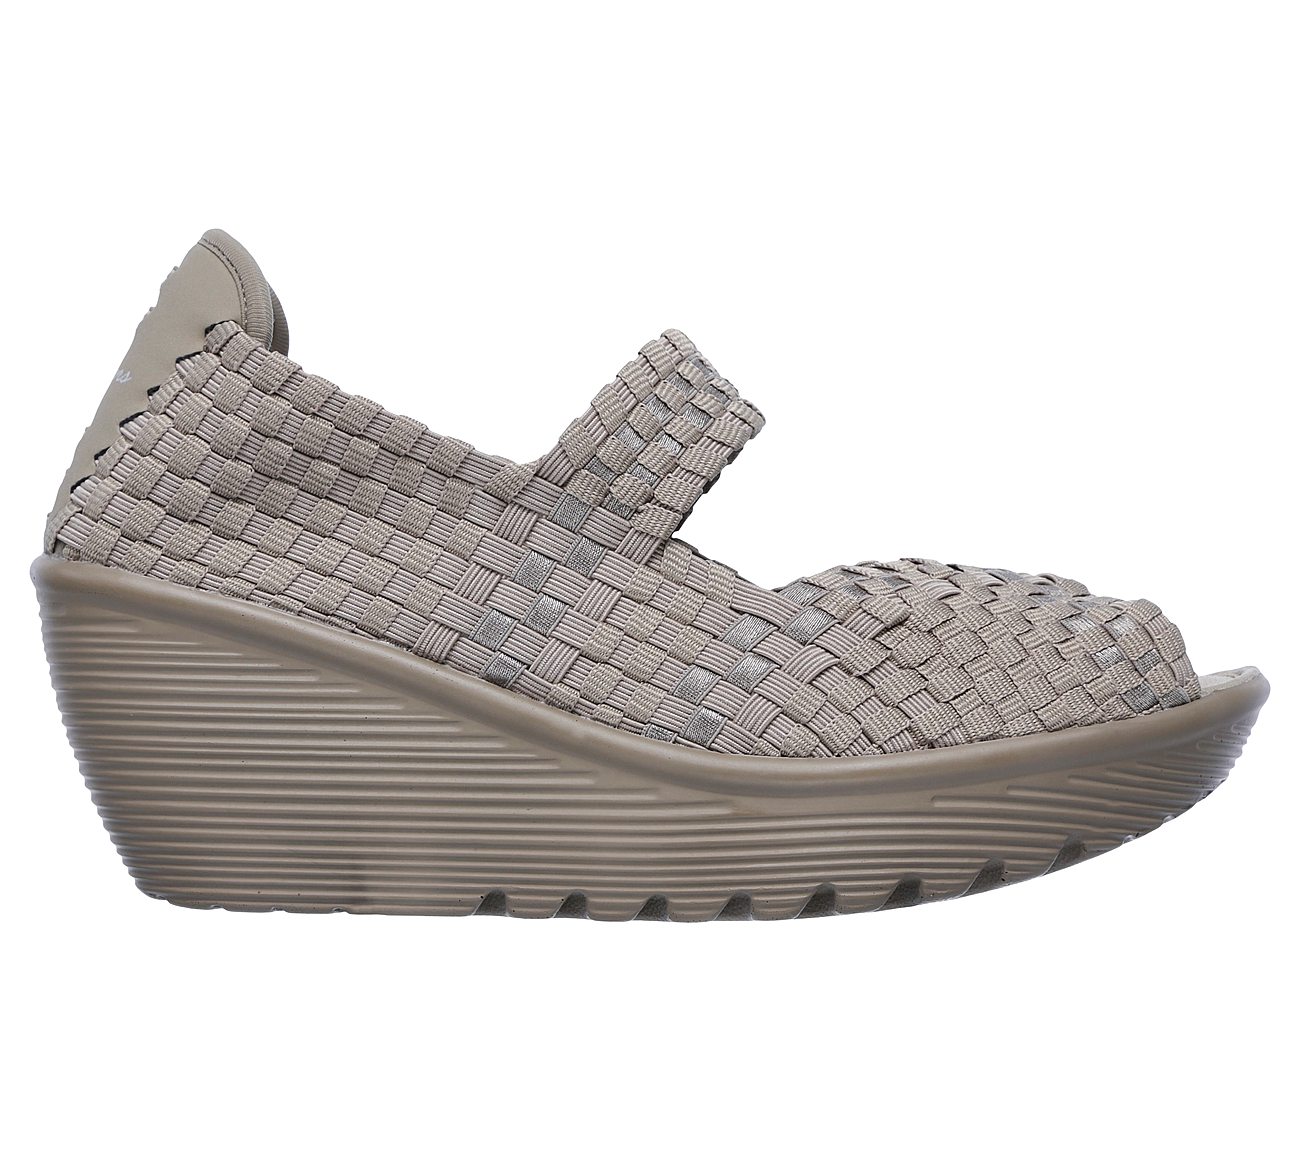 skechers mary jane wedge shoes